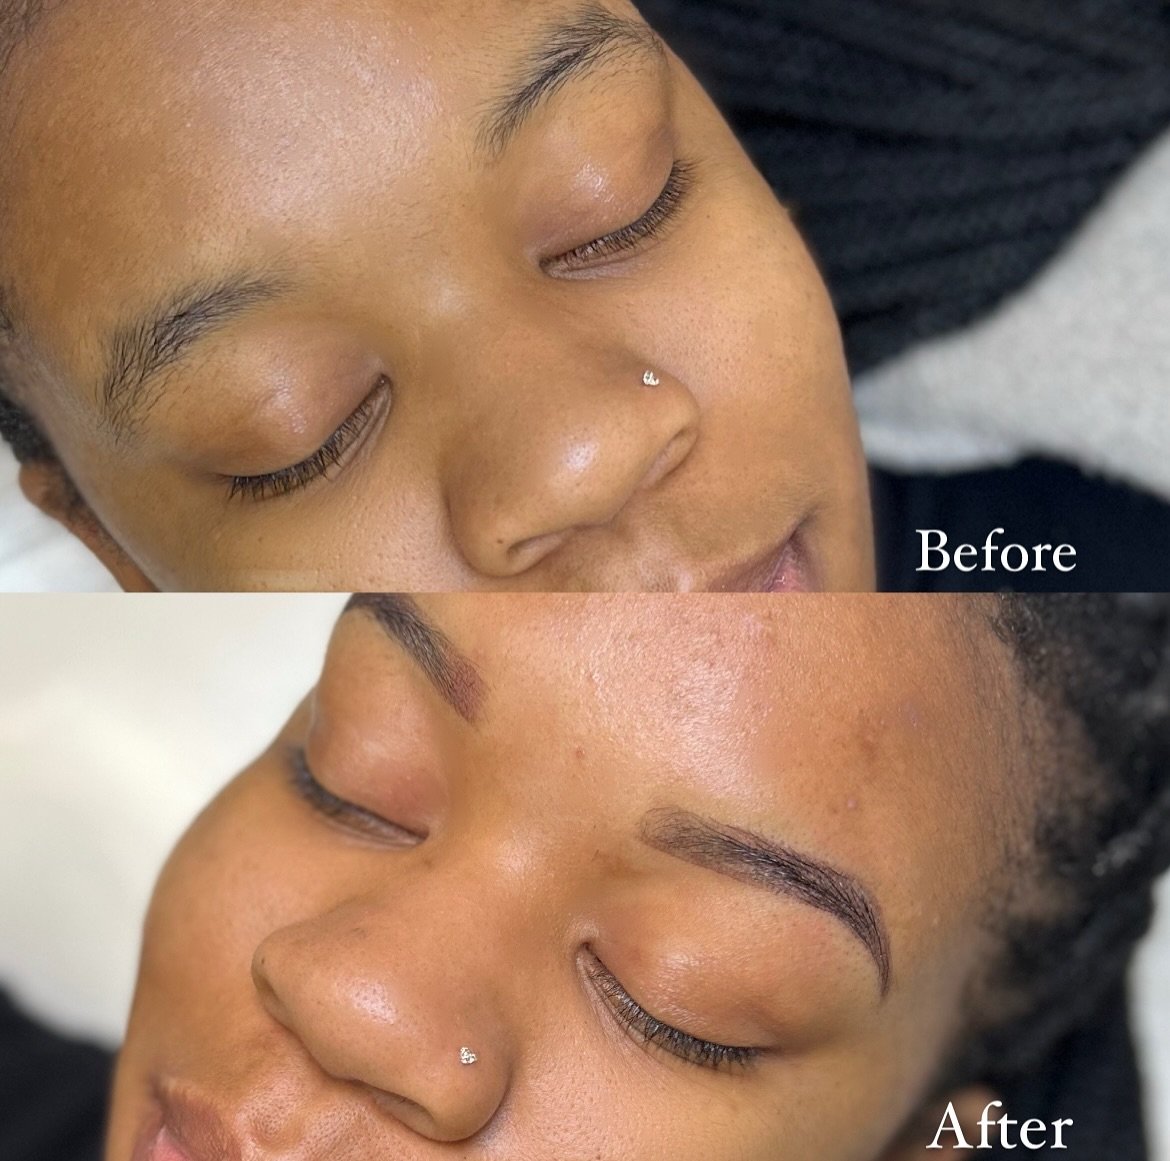 Now this is a transformation 🔥

Service: Ombr&eacute; Powder Brows
Duration: 2.5hrs
🗓️Lasts between 1-3yrs 

&mdash;&mdash;&mdash;&mdash;&mdash;&mdash;&mdash;&mdash;&mdash;&mdash;&mdash;&mdash;&mdash;&mdash;&mdash;&mdash;&mdash;&mdash;&mdash;&mdash